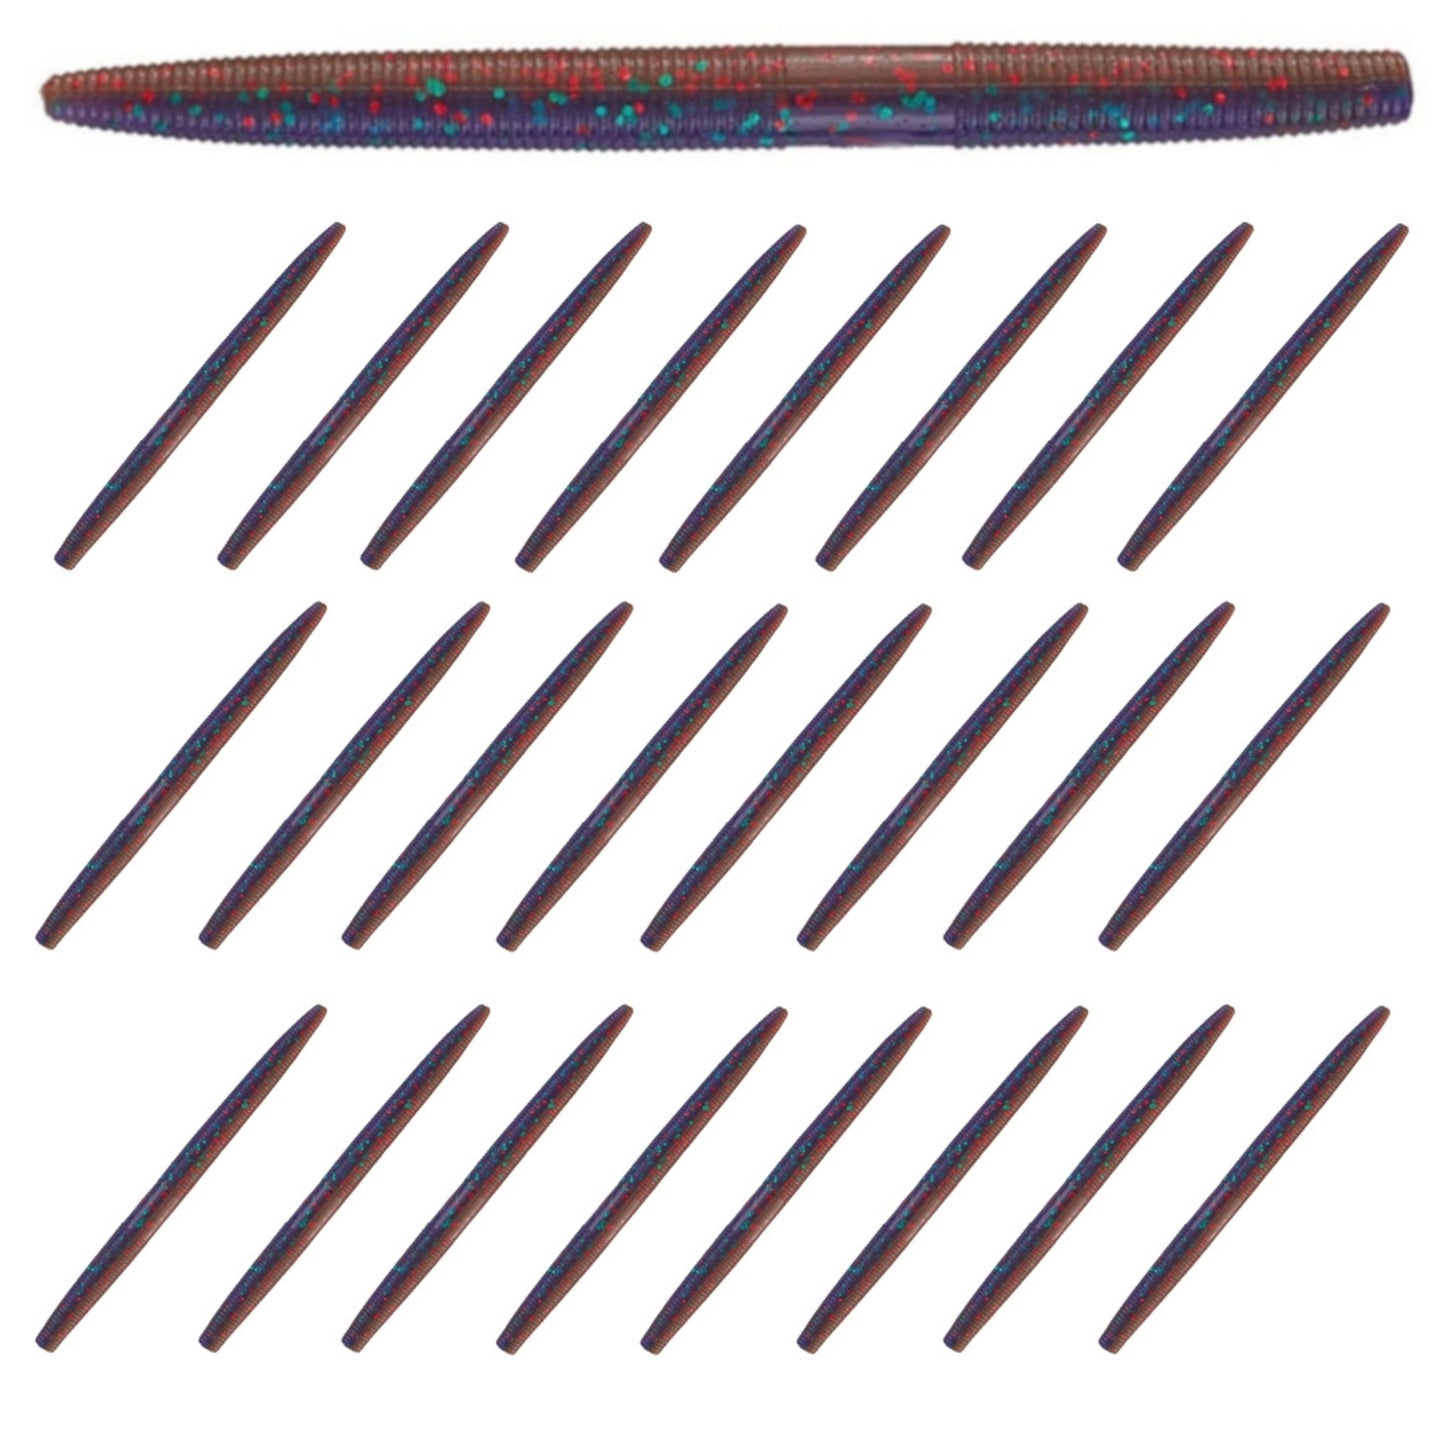 Reaction Tackle Soft Plastic Wacky Worms 5.5in - 24 Pack